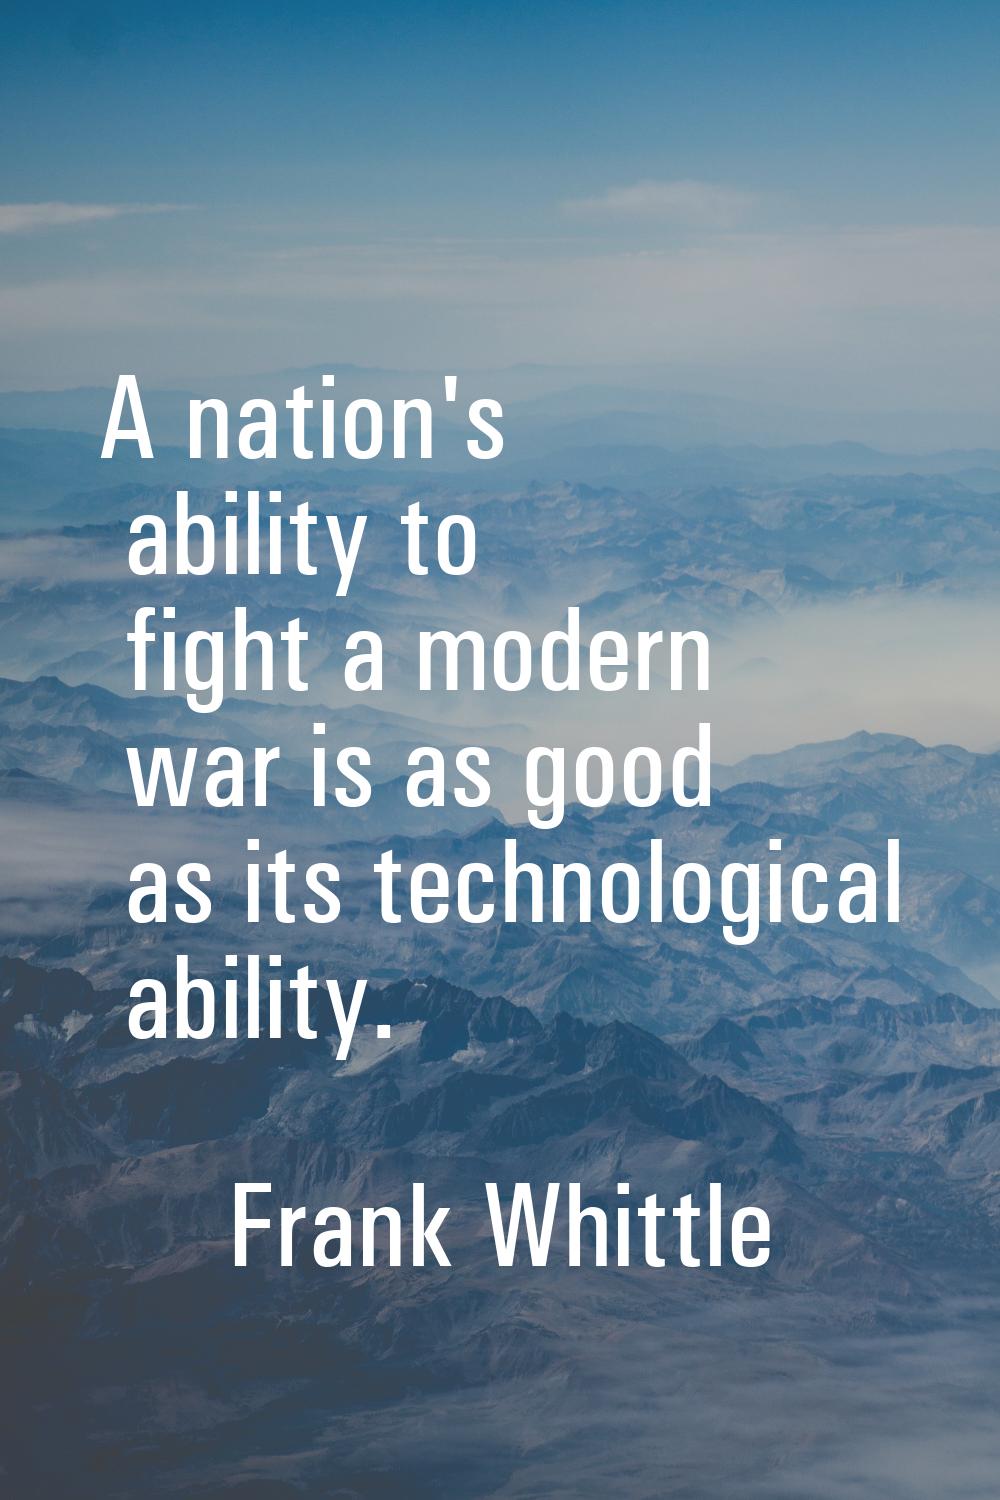 A nation's ability to fight a modern war is as good as its technological ability.